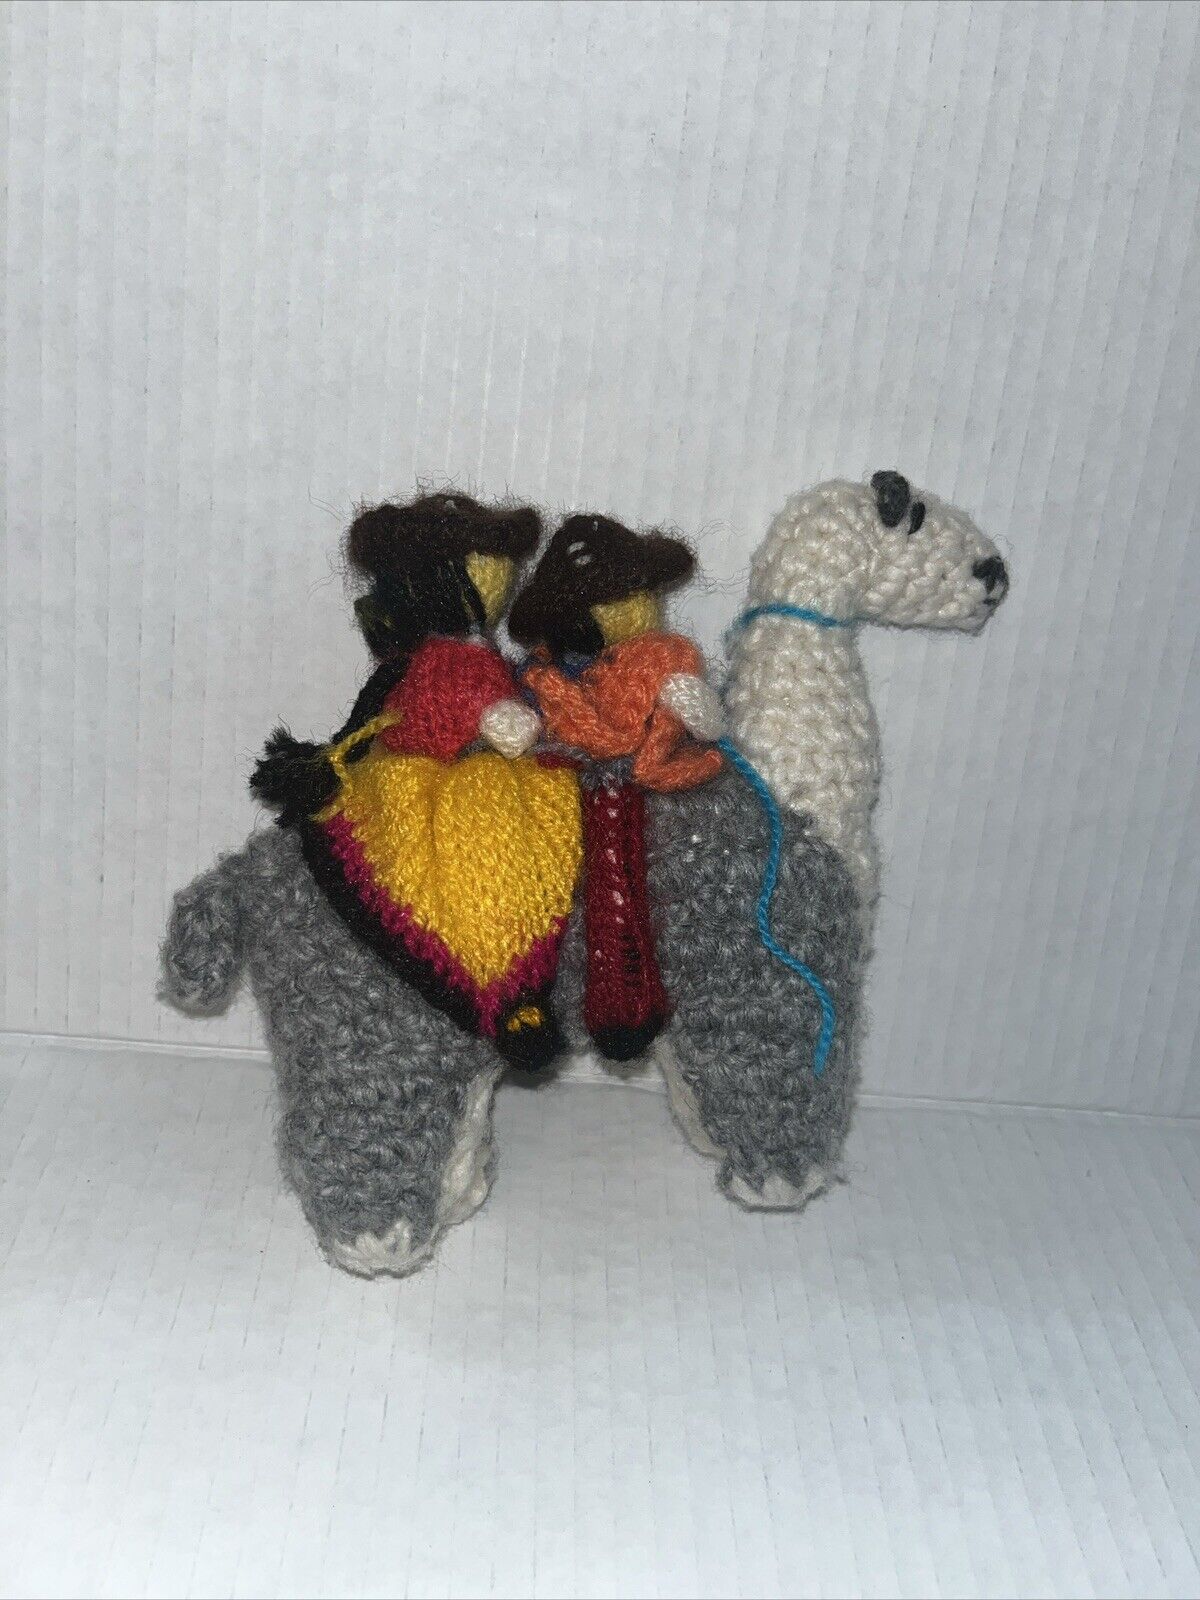 Vintage Peruvian Hand Knitted Alpaca With 2 Riders Plush